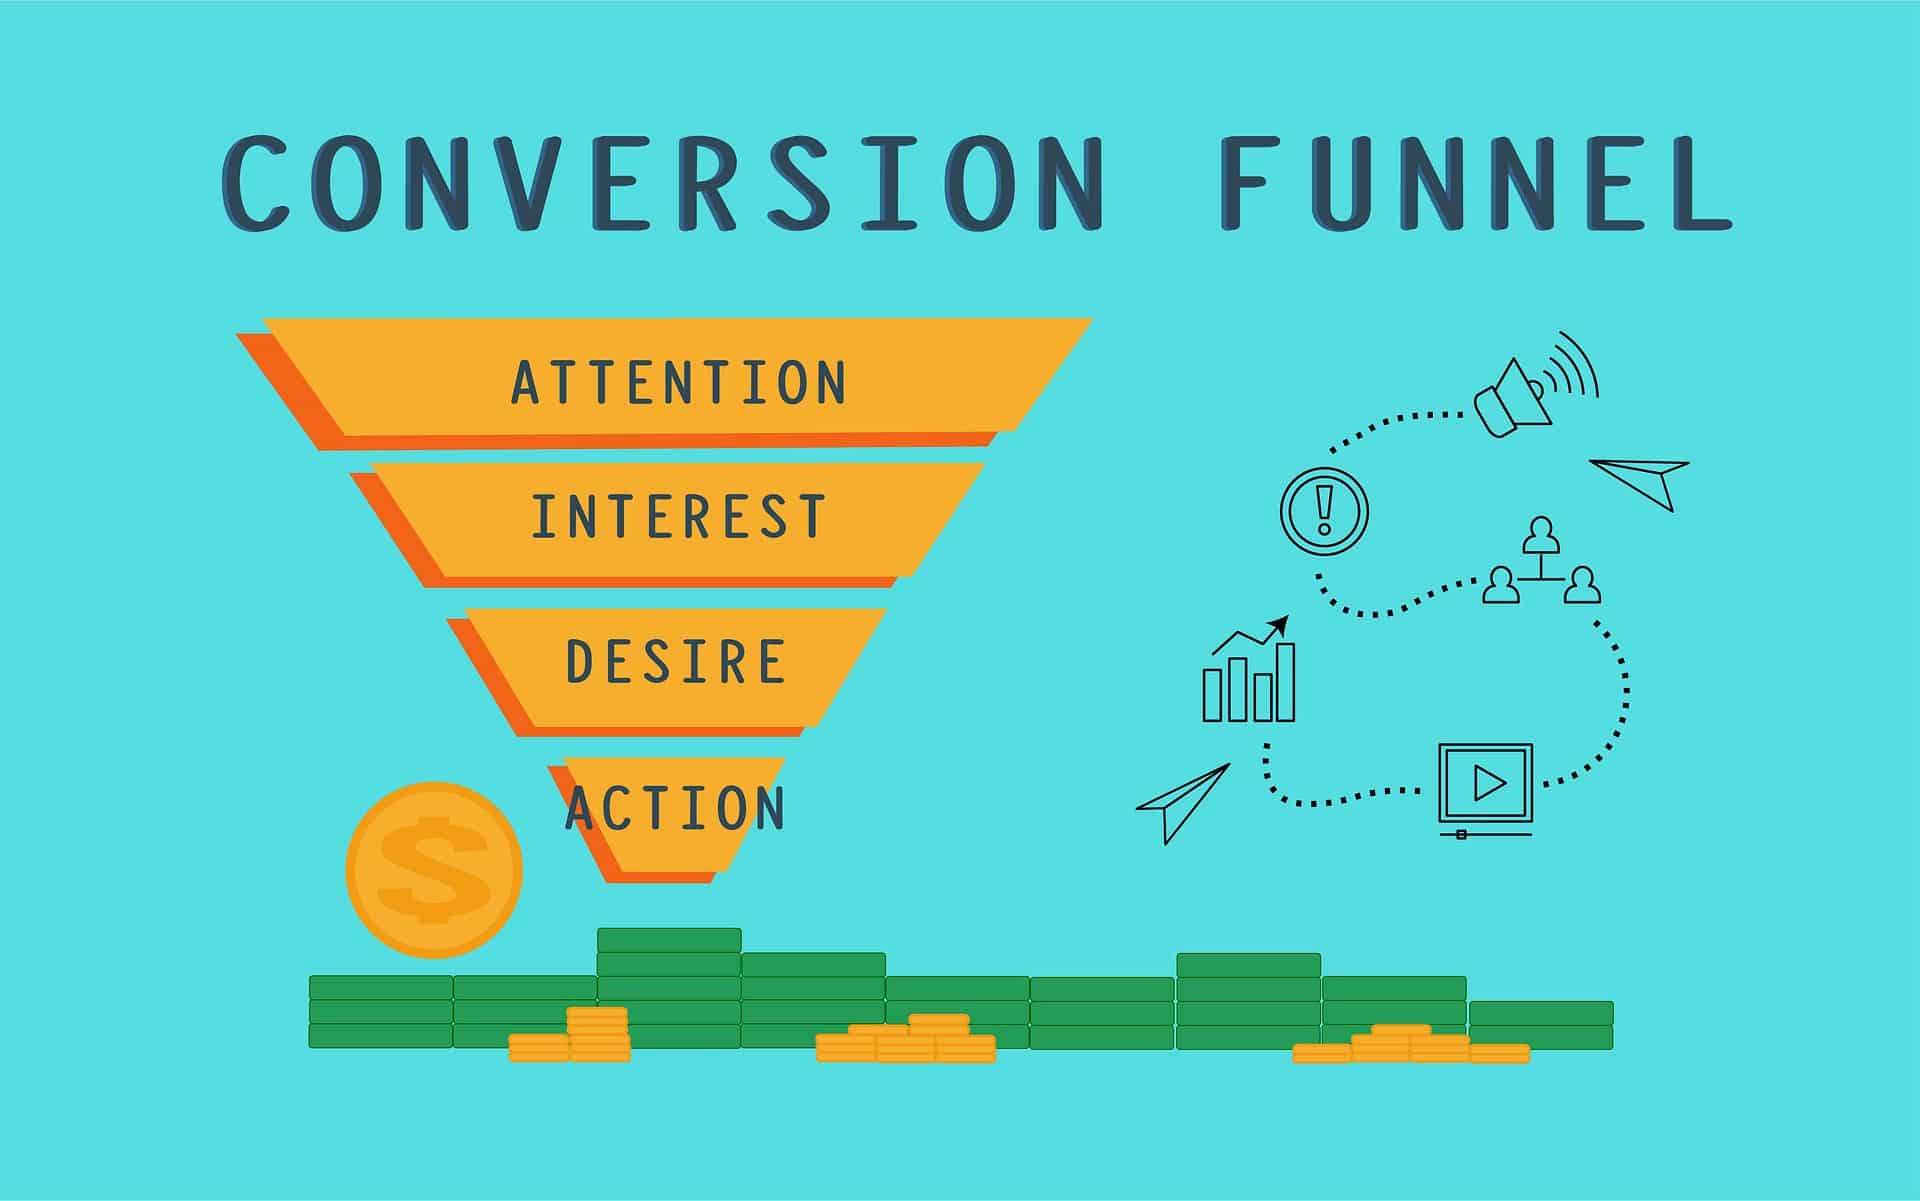 A concept of the conversion funnel, drilling down from "attention" to "interest" to "desire" to "action."